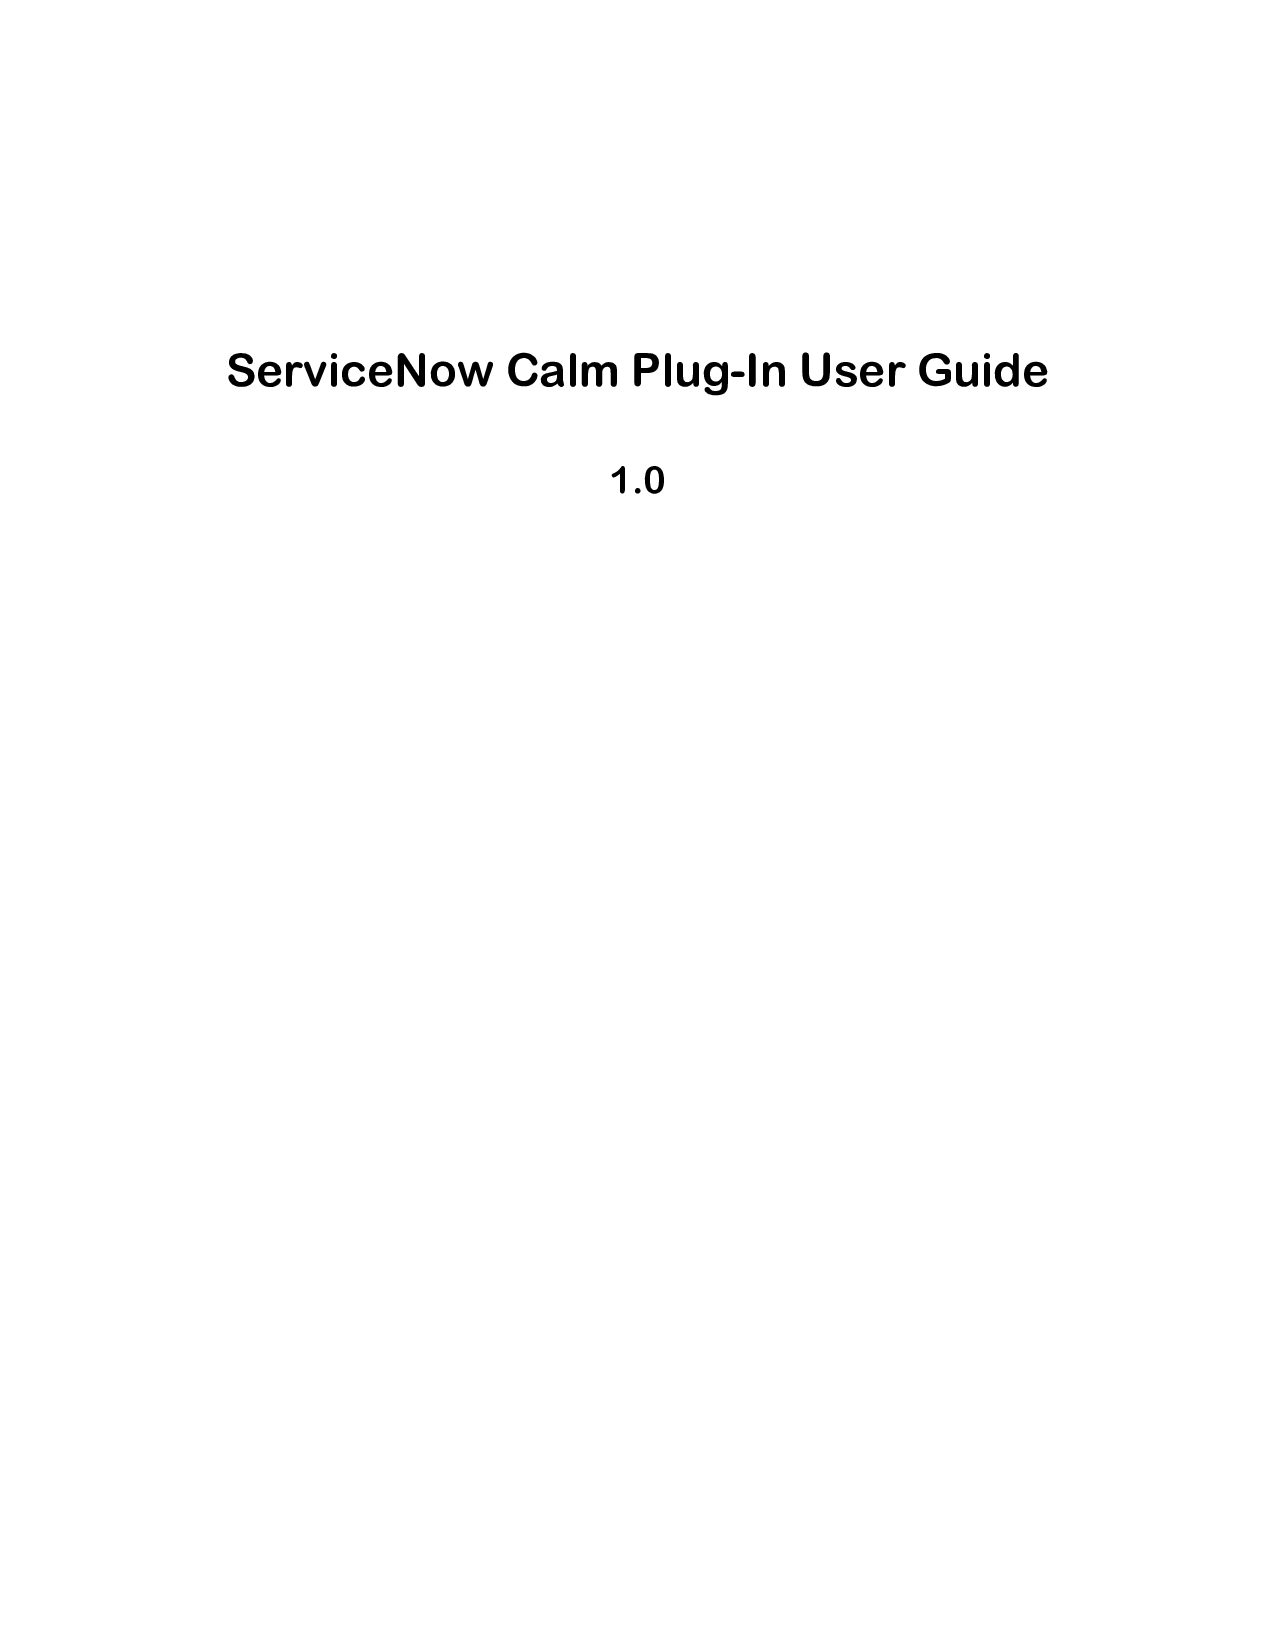 Page 1 of 9 - ServiceNow Calm Plug-In User Guide Calm-Service Now-Plug-In-User-Guide-v1.0